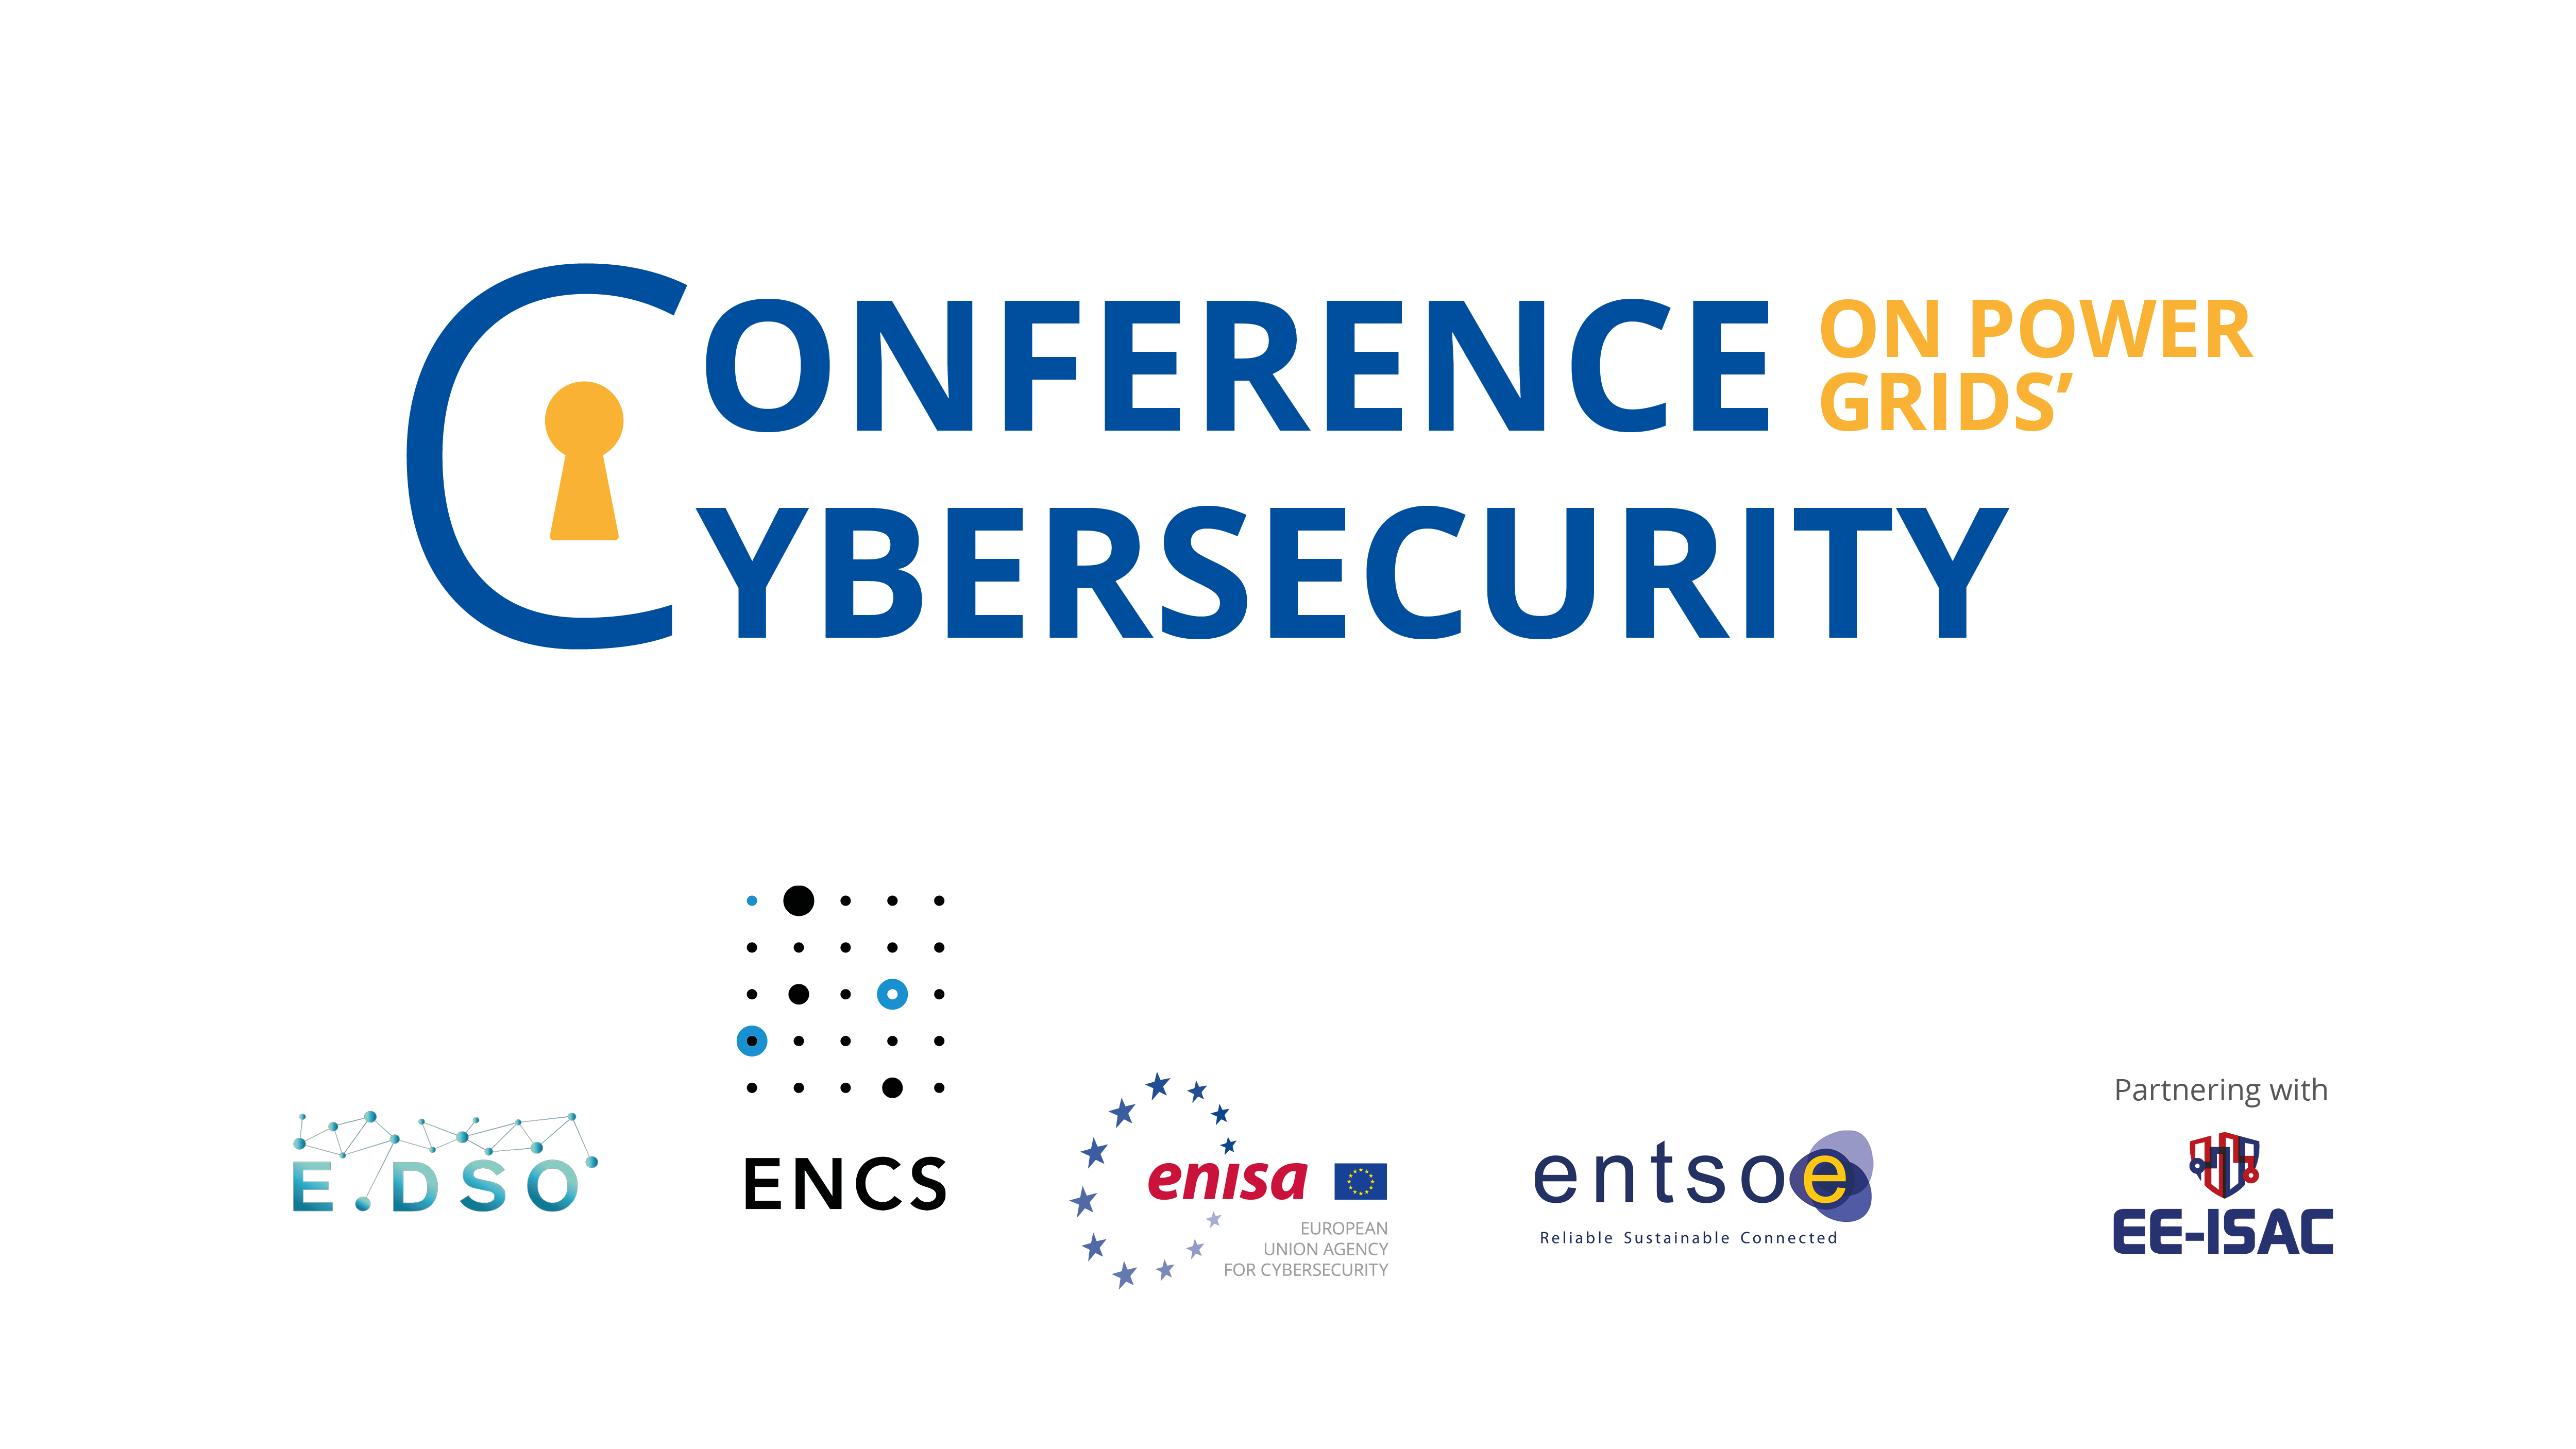 E.DSO-ENCS-ENISA-ENTSO-E 6th Event on Cybersecurity 'European energy grids’ security in a changed landscape – closing the skills gap and getting prepared'